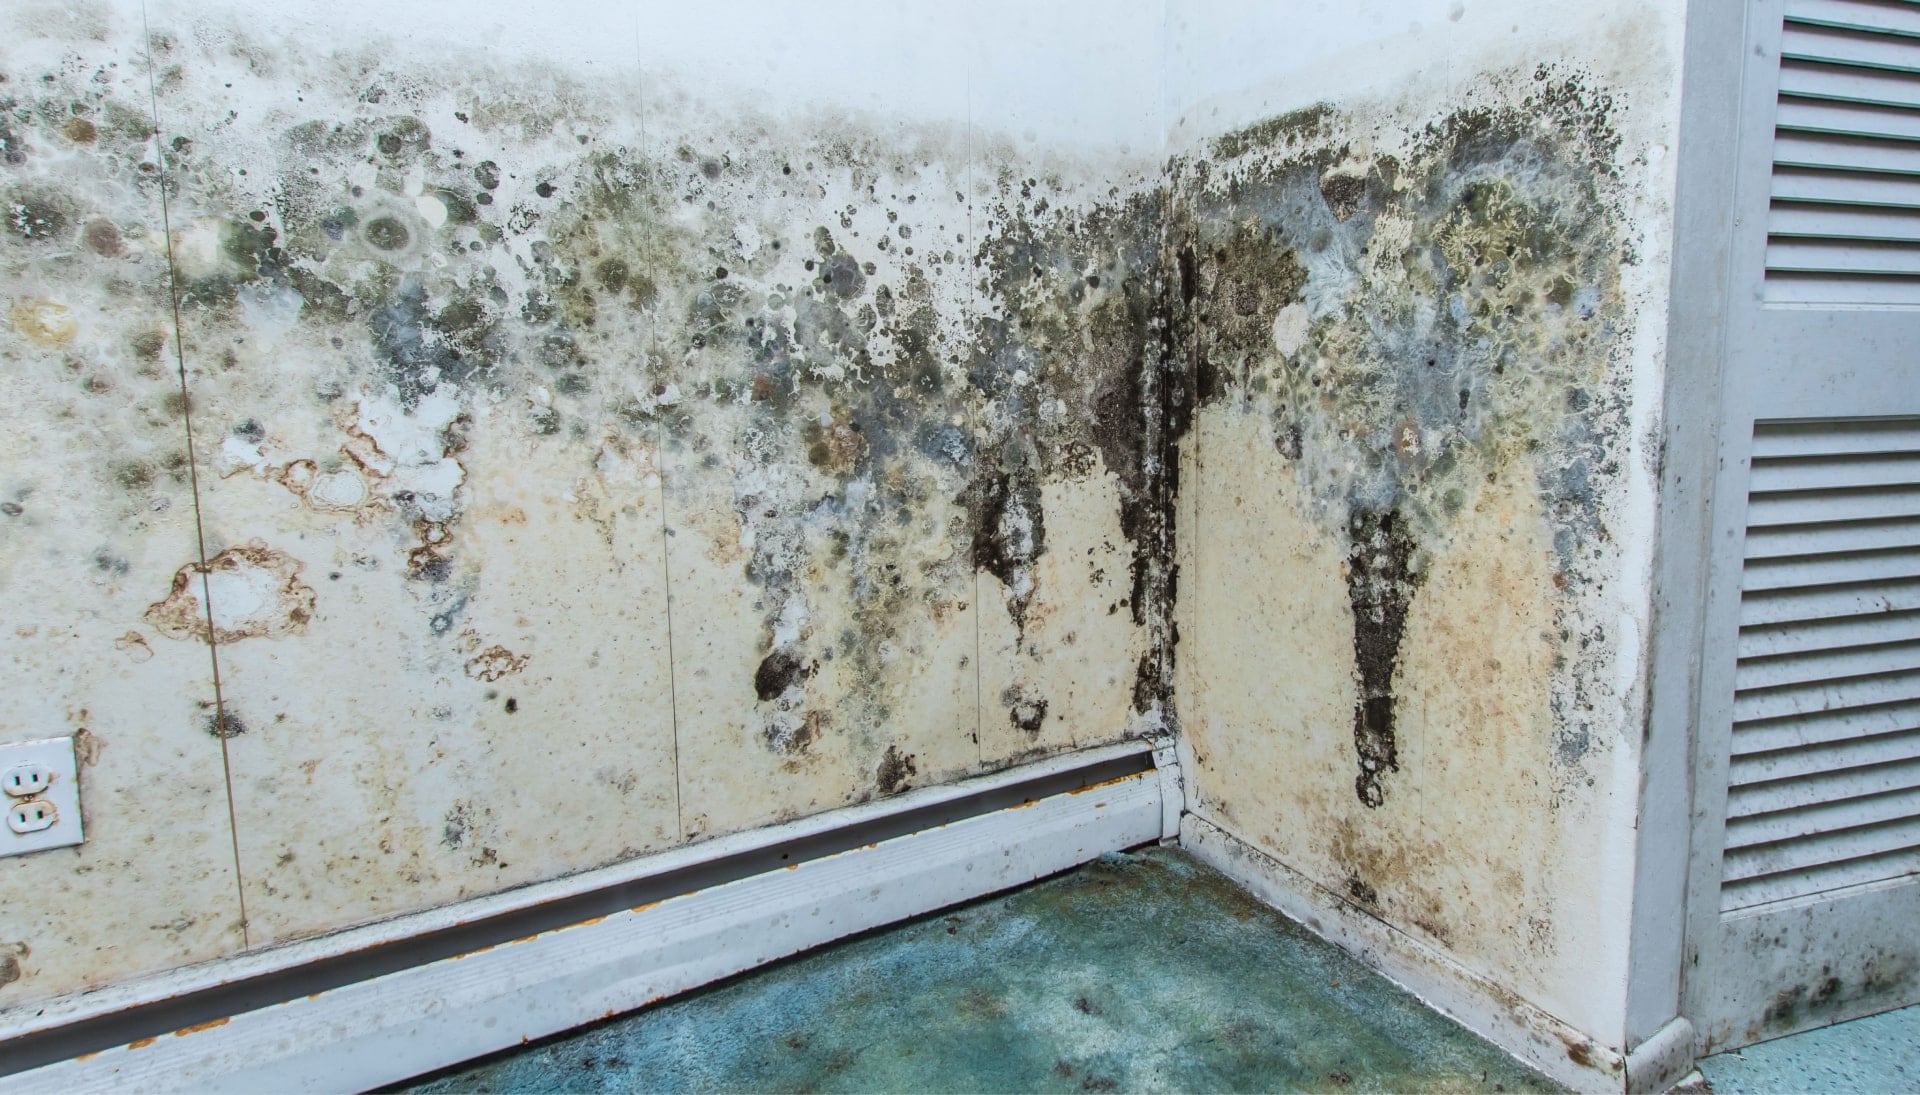 Professional mold removal, odor control, and water damage restoration service in Mesa, Arizona.